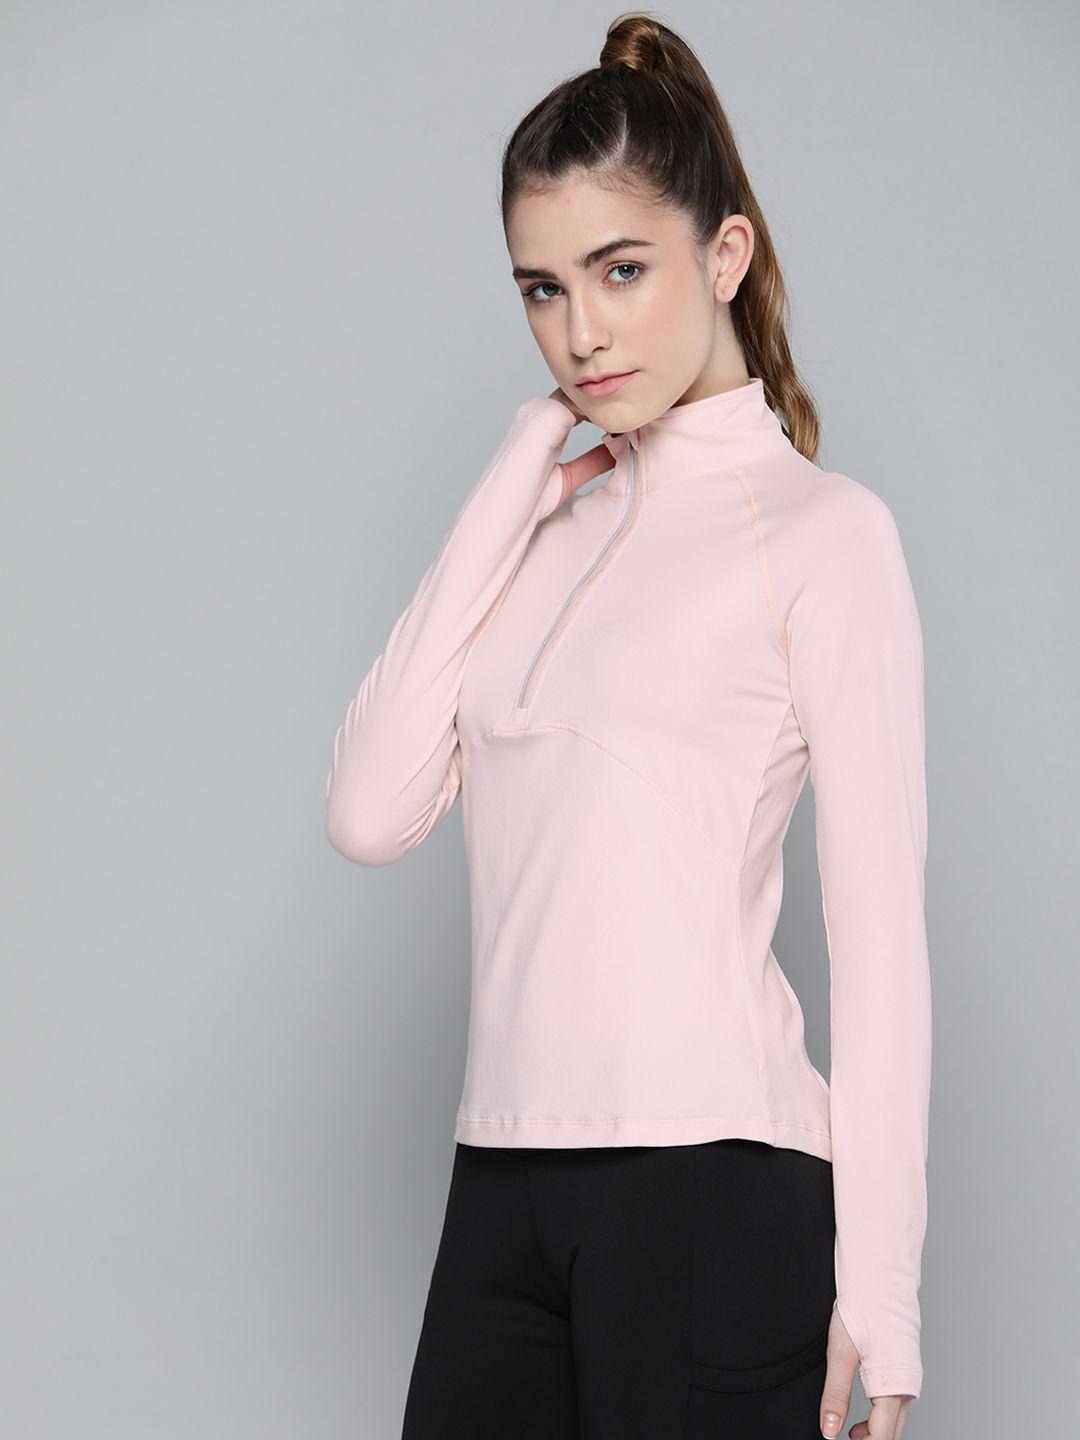 fitkin women pink solid high neck training t-shirt